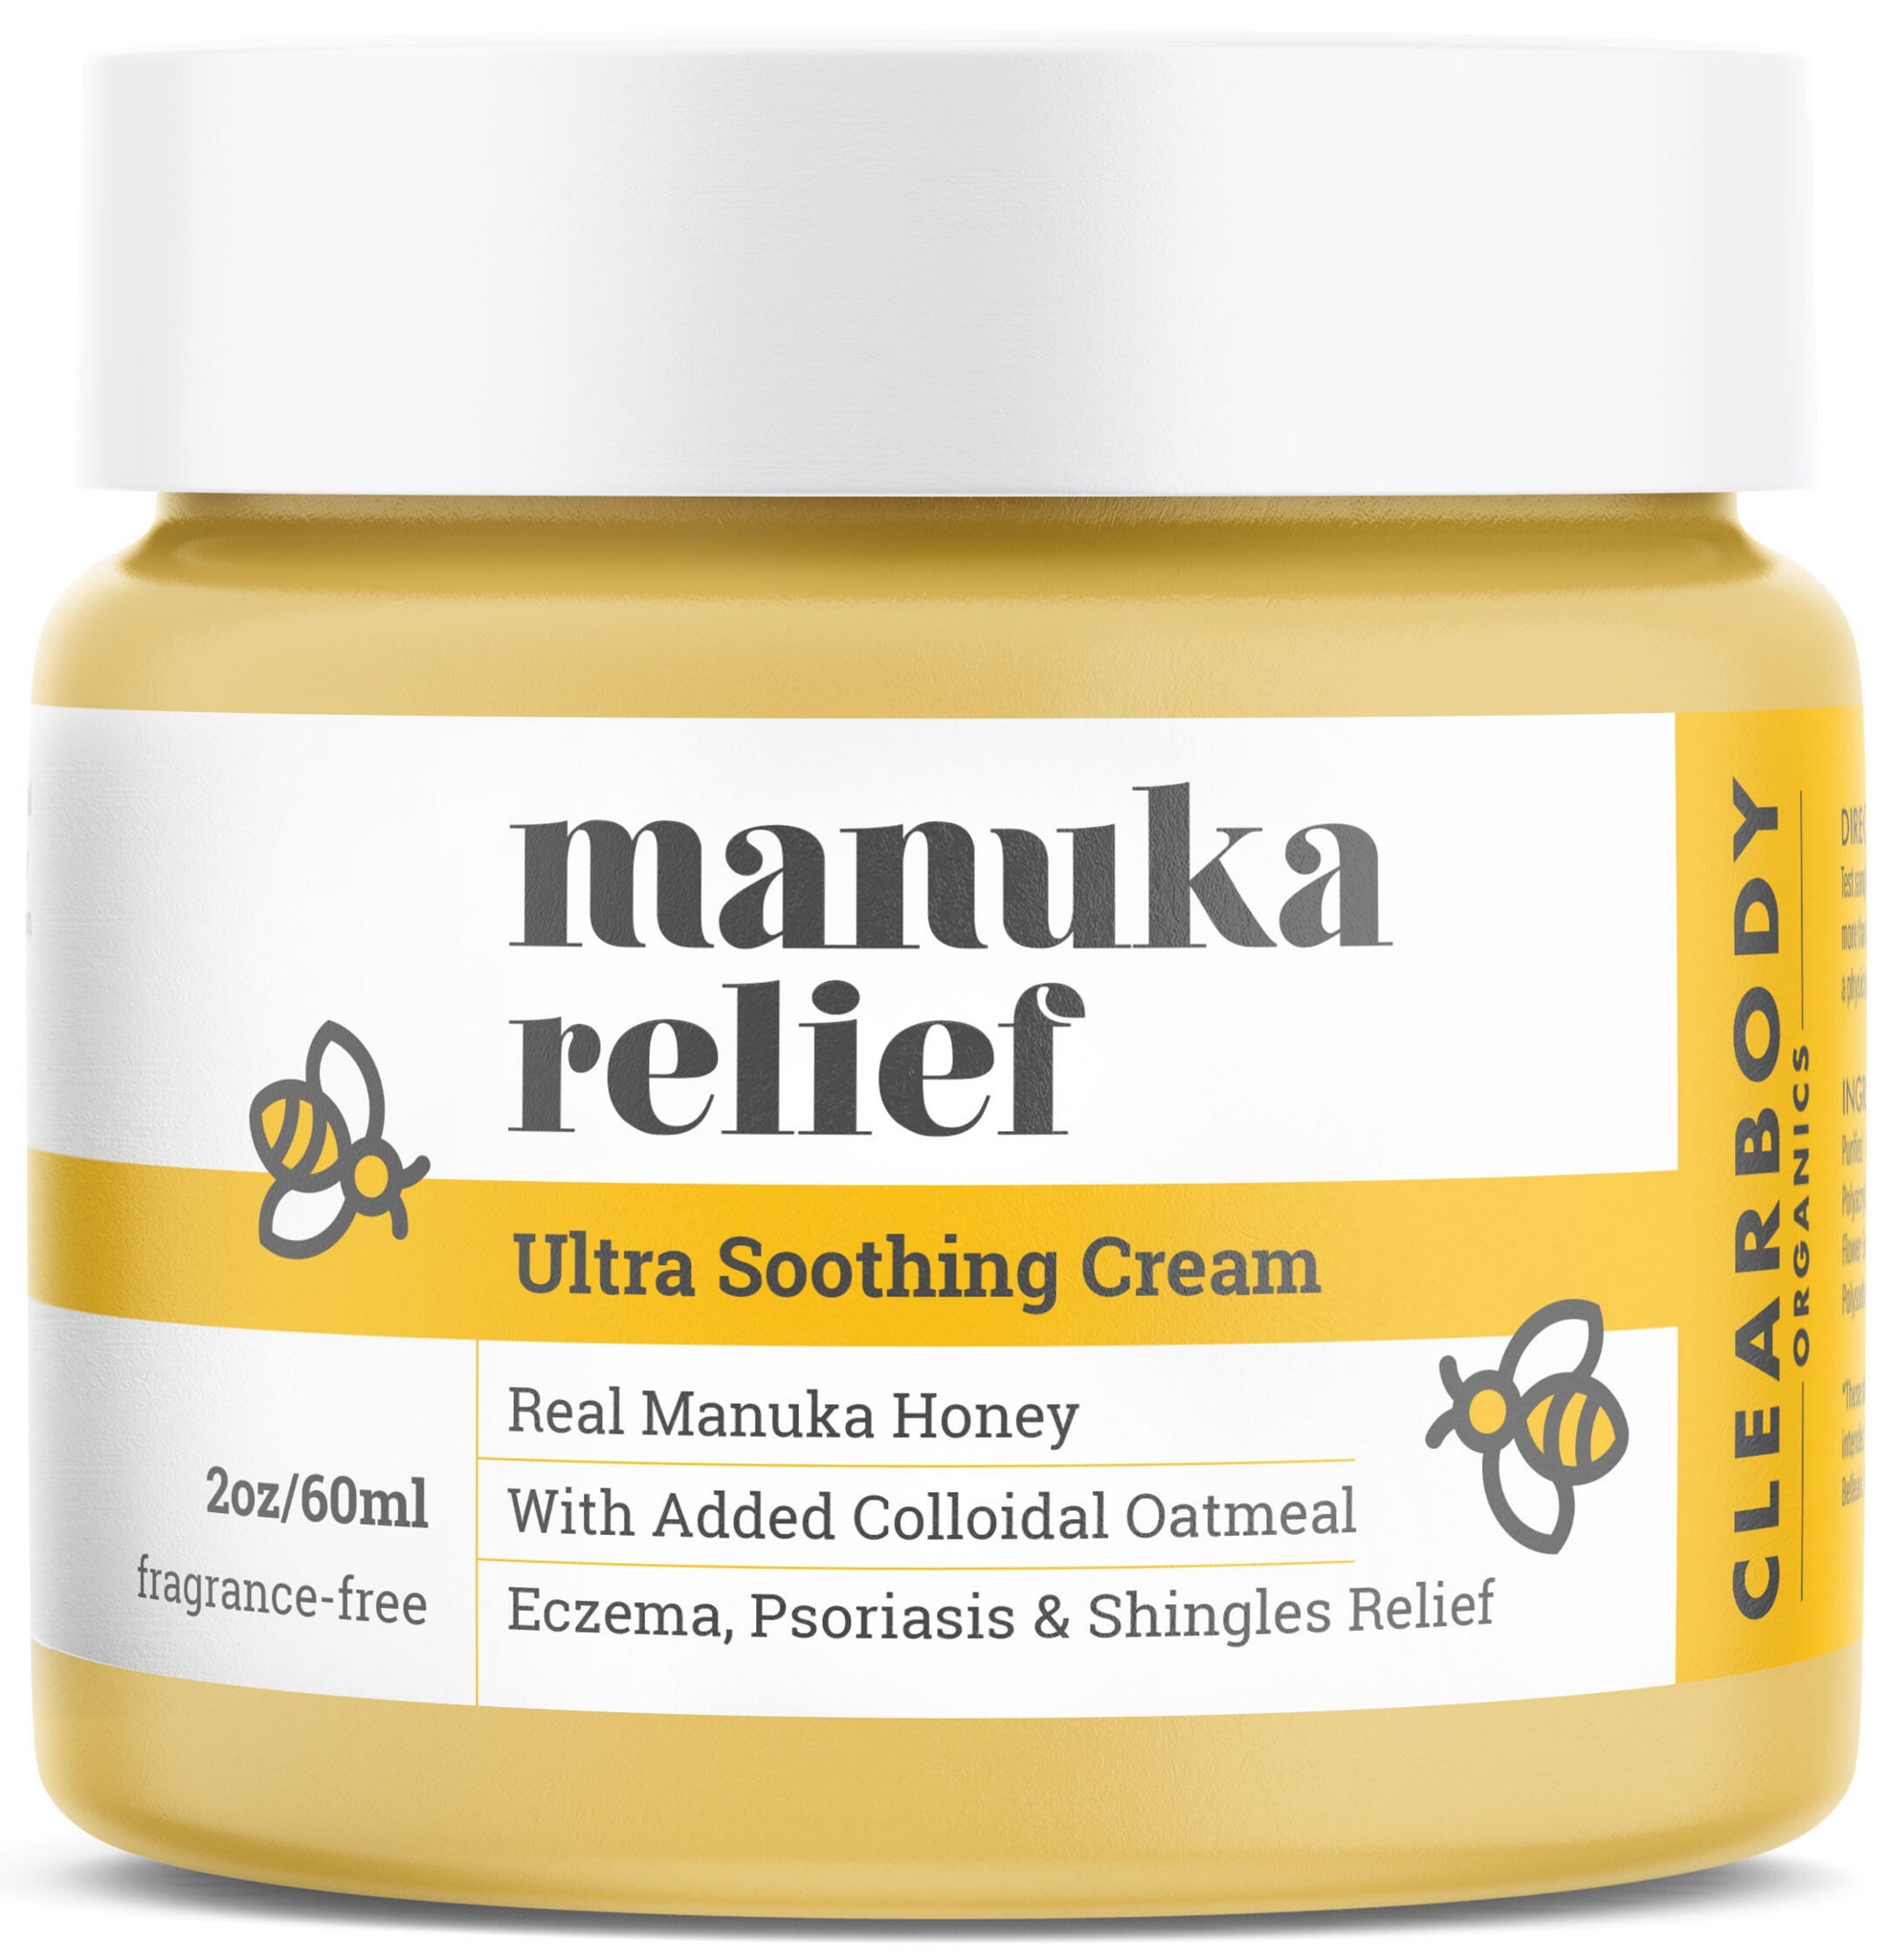 Manuka Relief Cream for Eczema Psoriasis Shingles Prone, Dry Skin- Colloidal Oatmeal & Manuka Honey- Clean, Soothing Ointment for Kids, Adults, Baby- Plant Based Formula Treatment